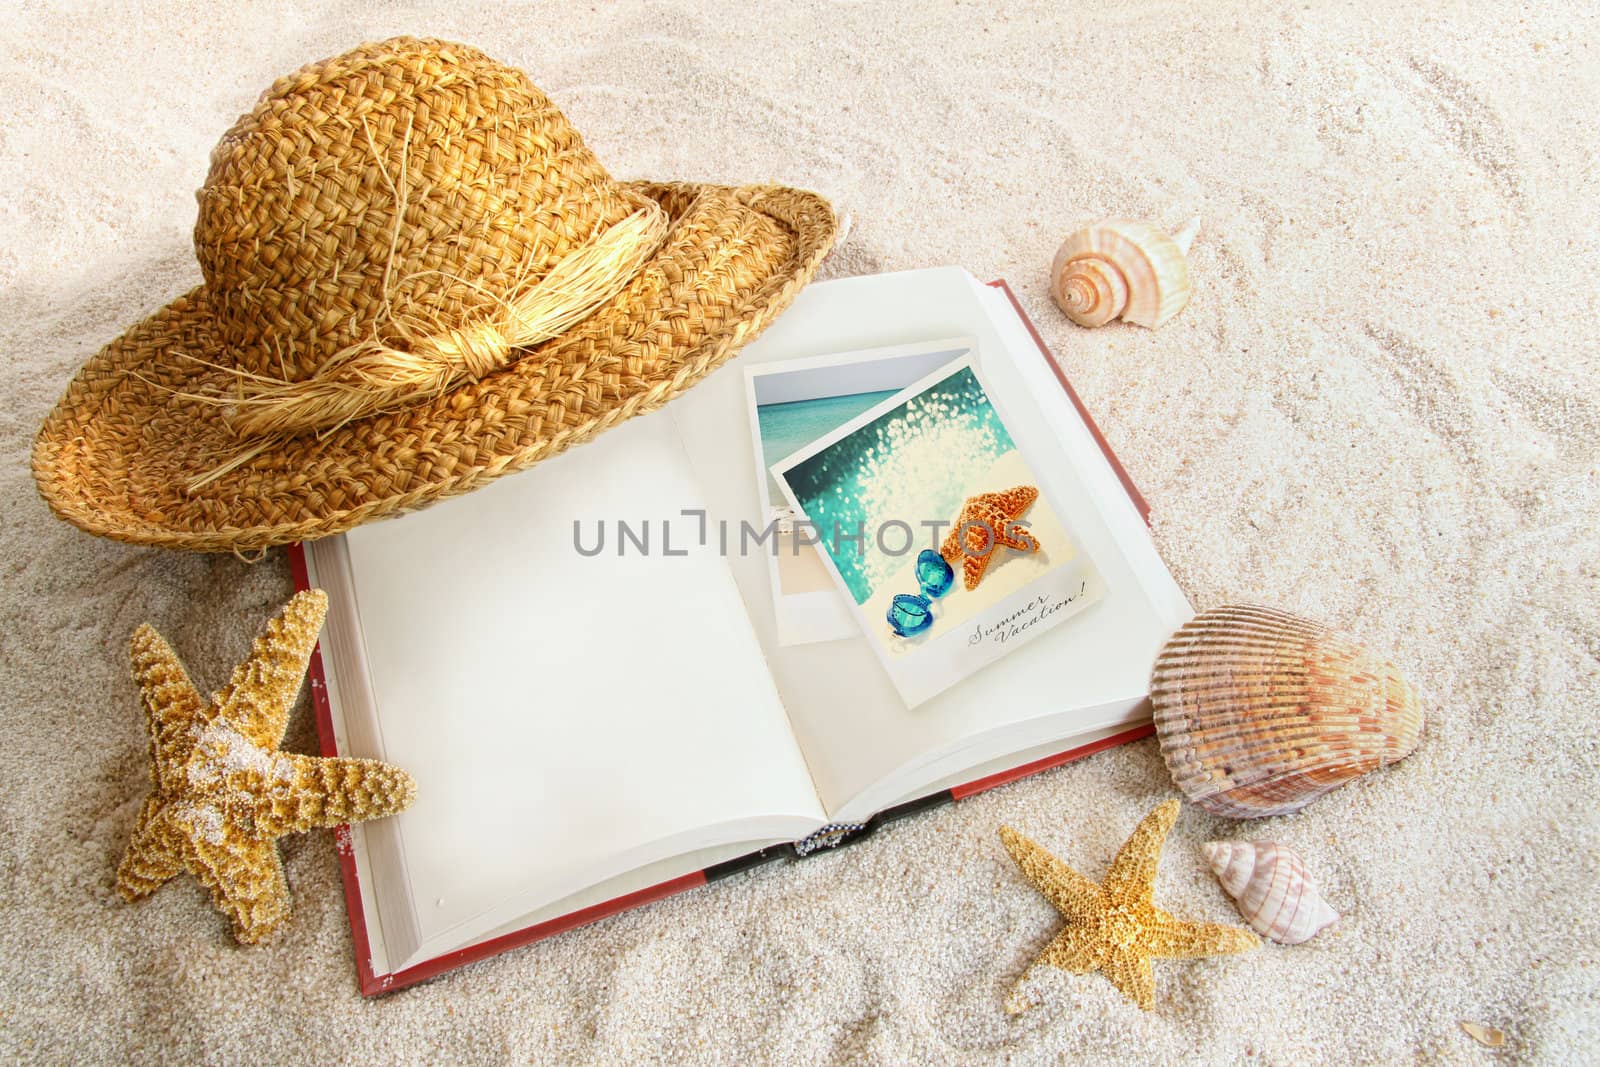 Book with straw hat and seashells in sand by Sandralise